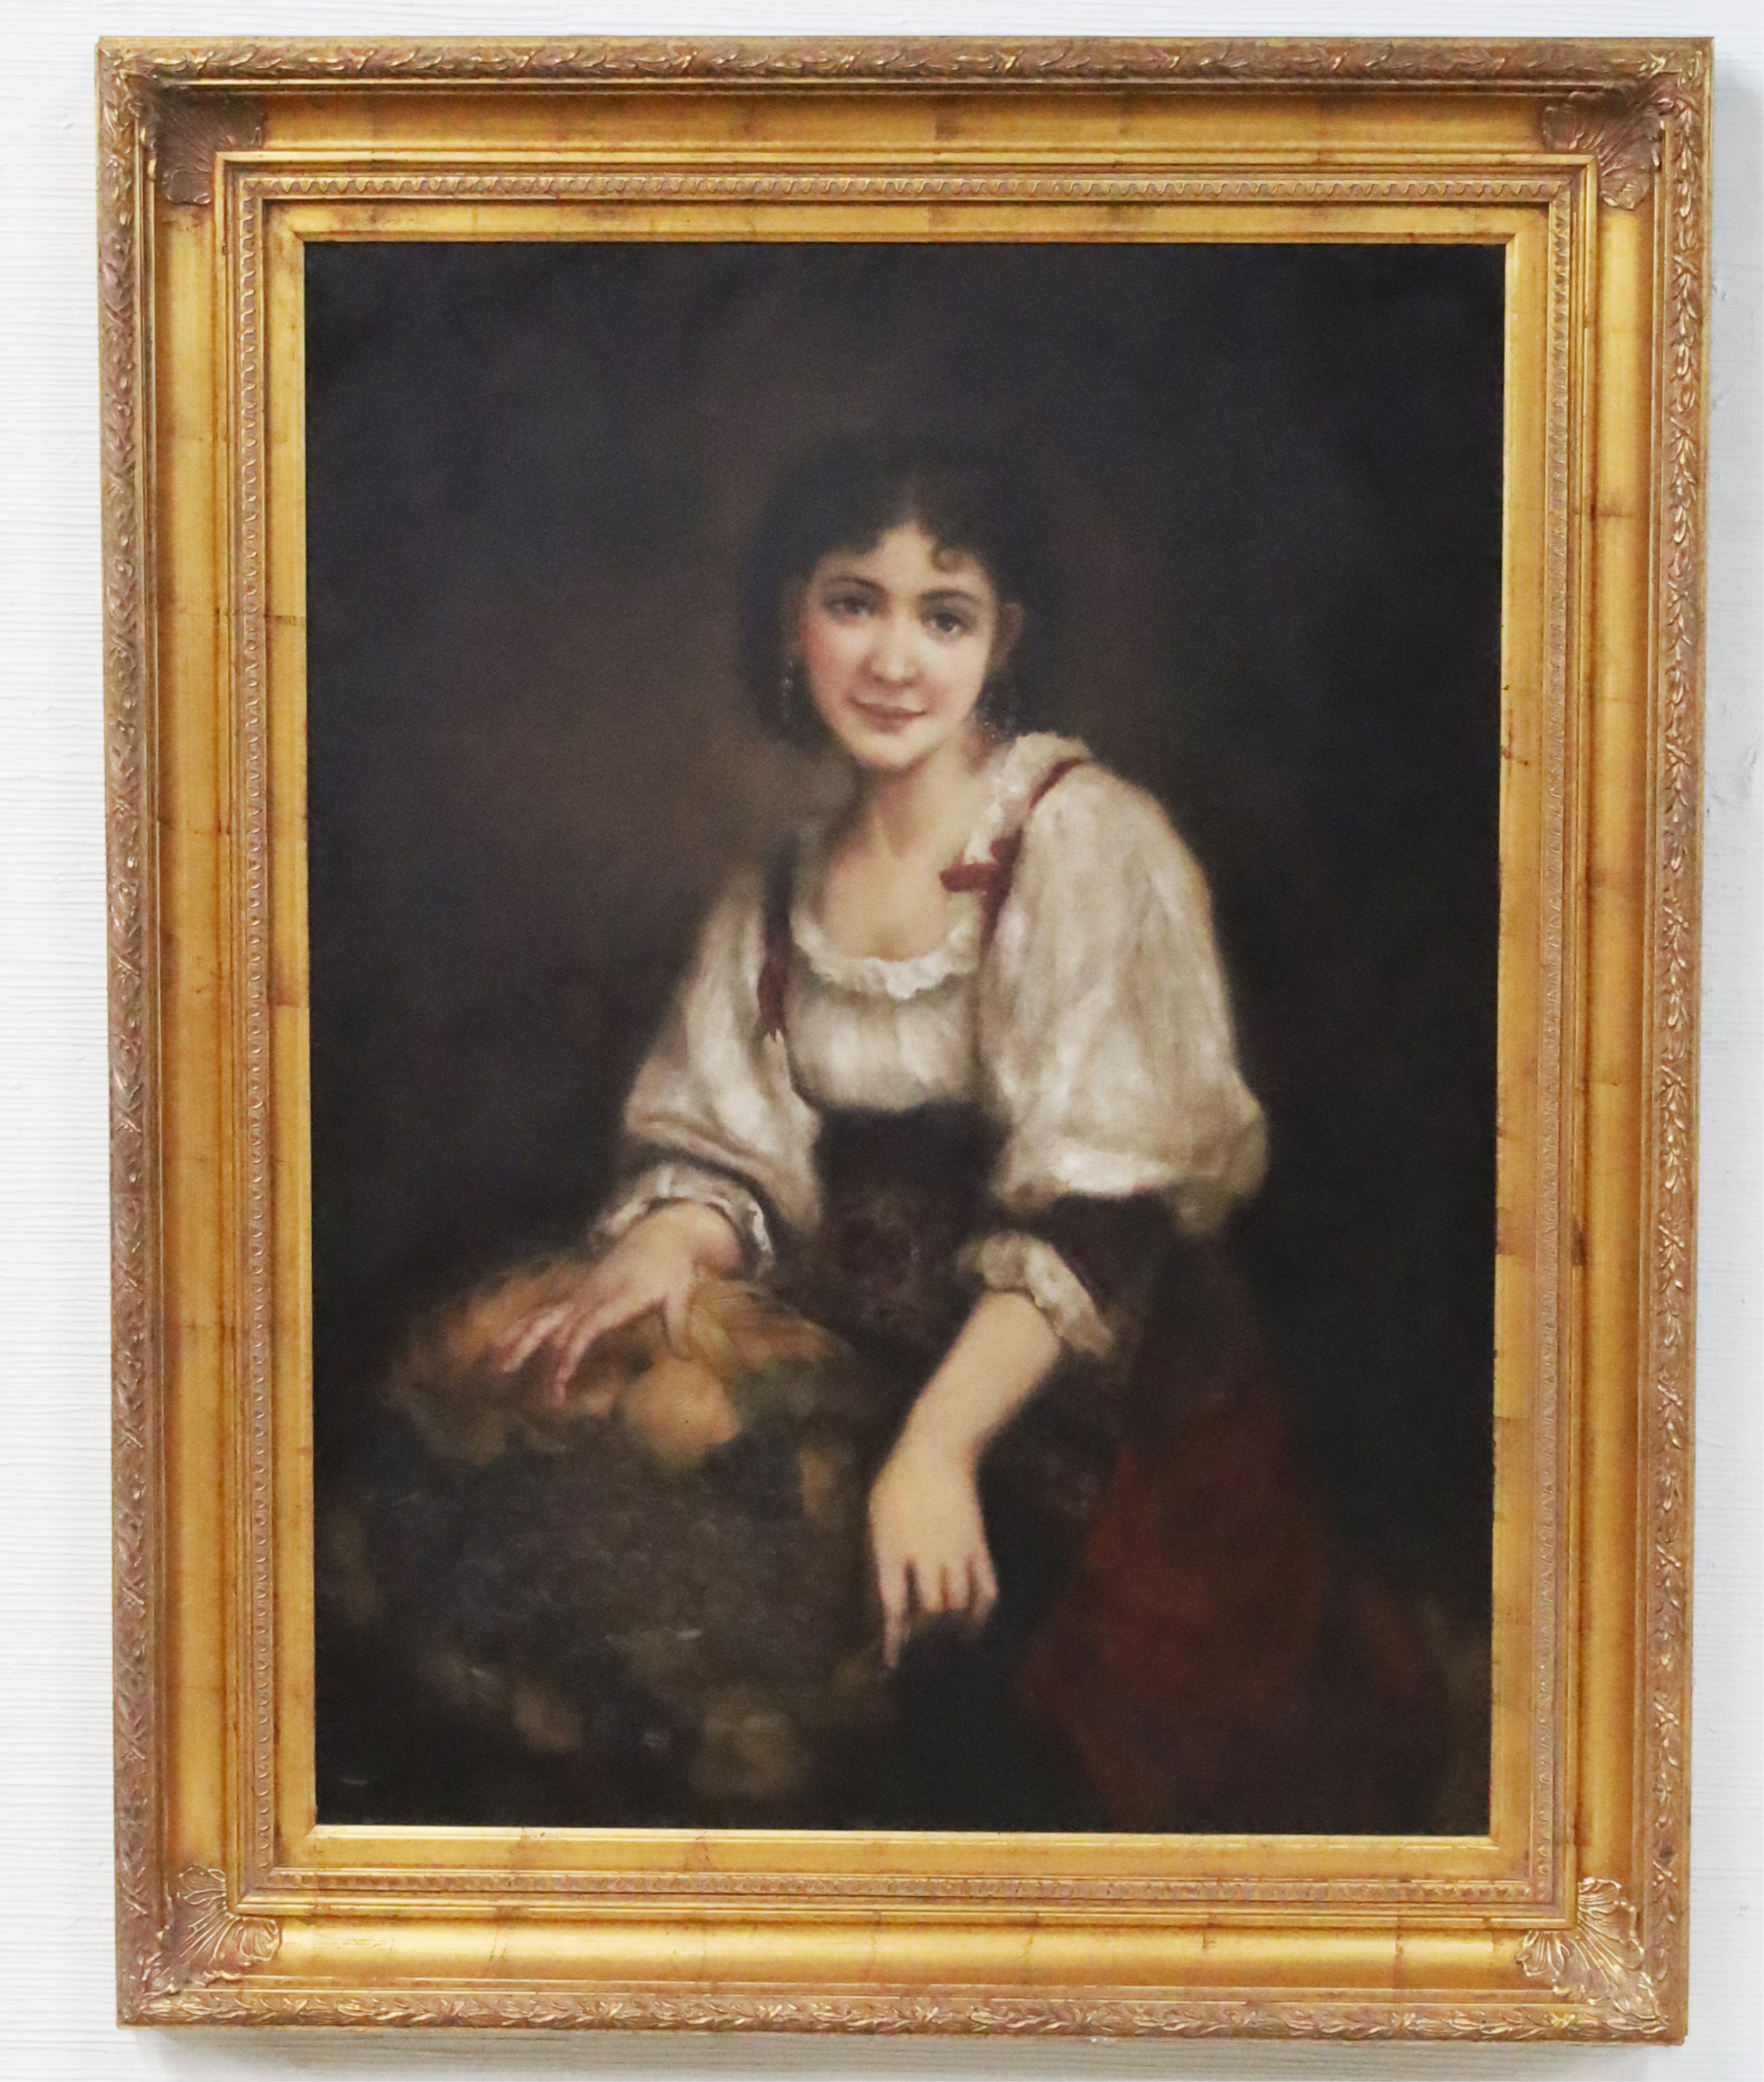 FRAMED O/C PAINTING OF YOUNG GIRL